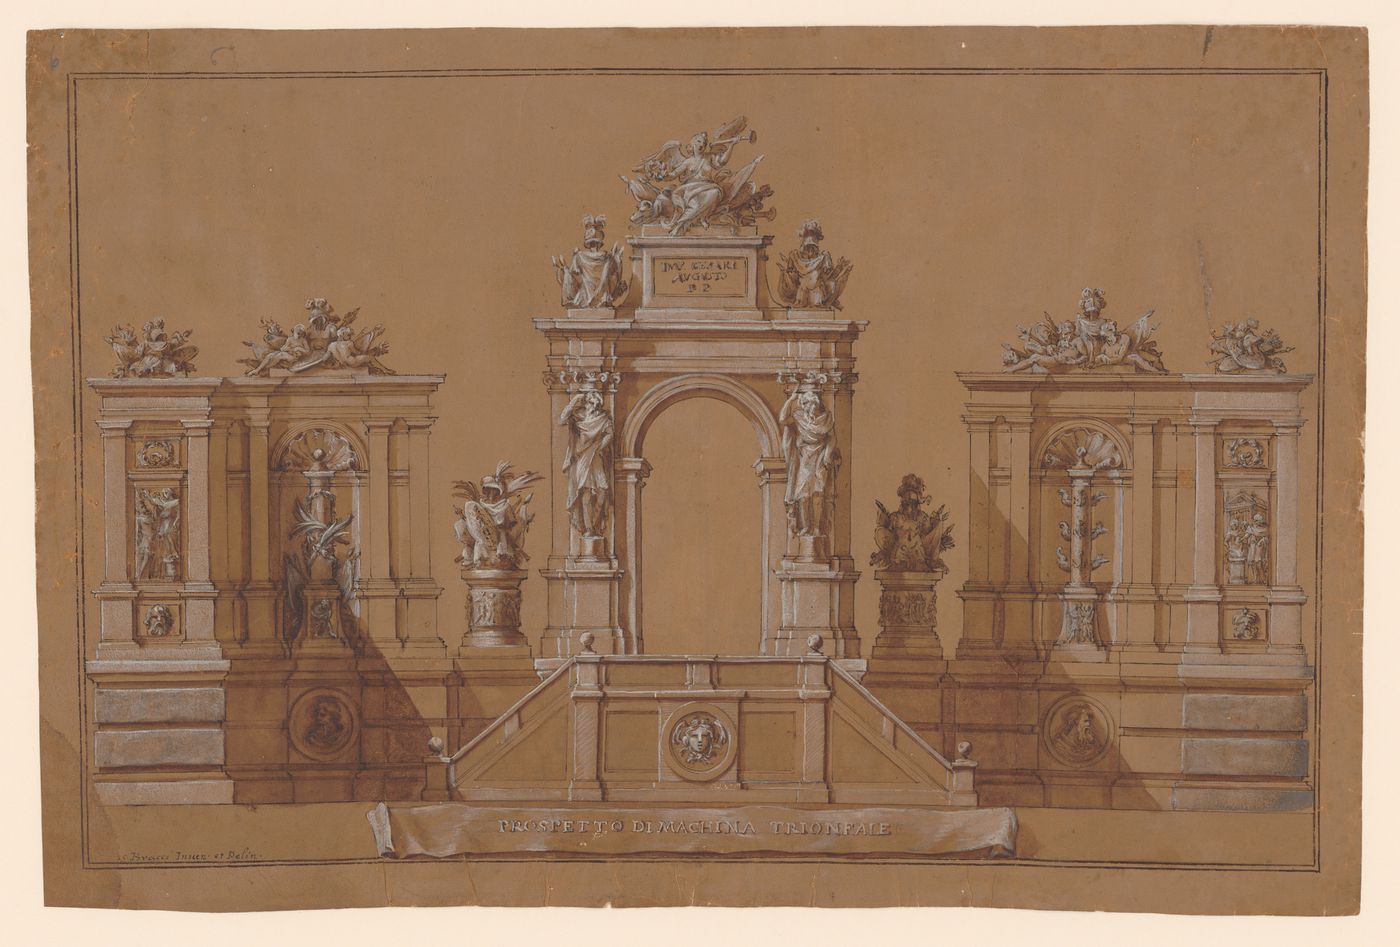 Elevation for a triumphal arch